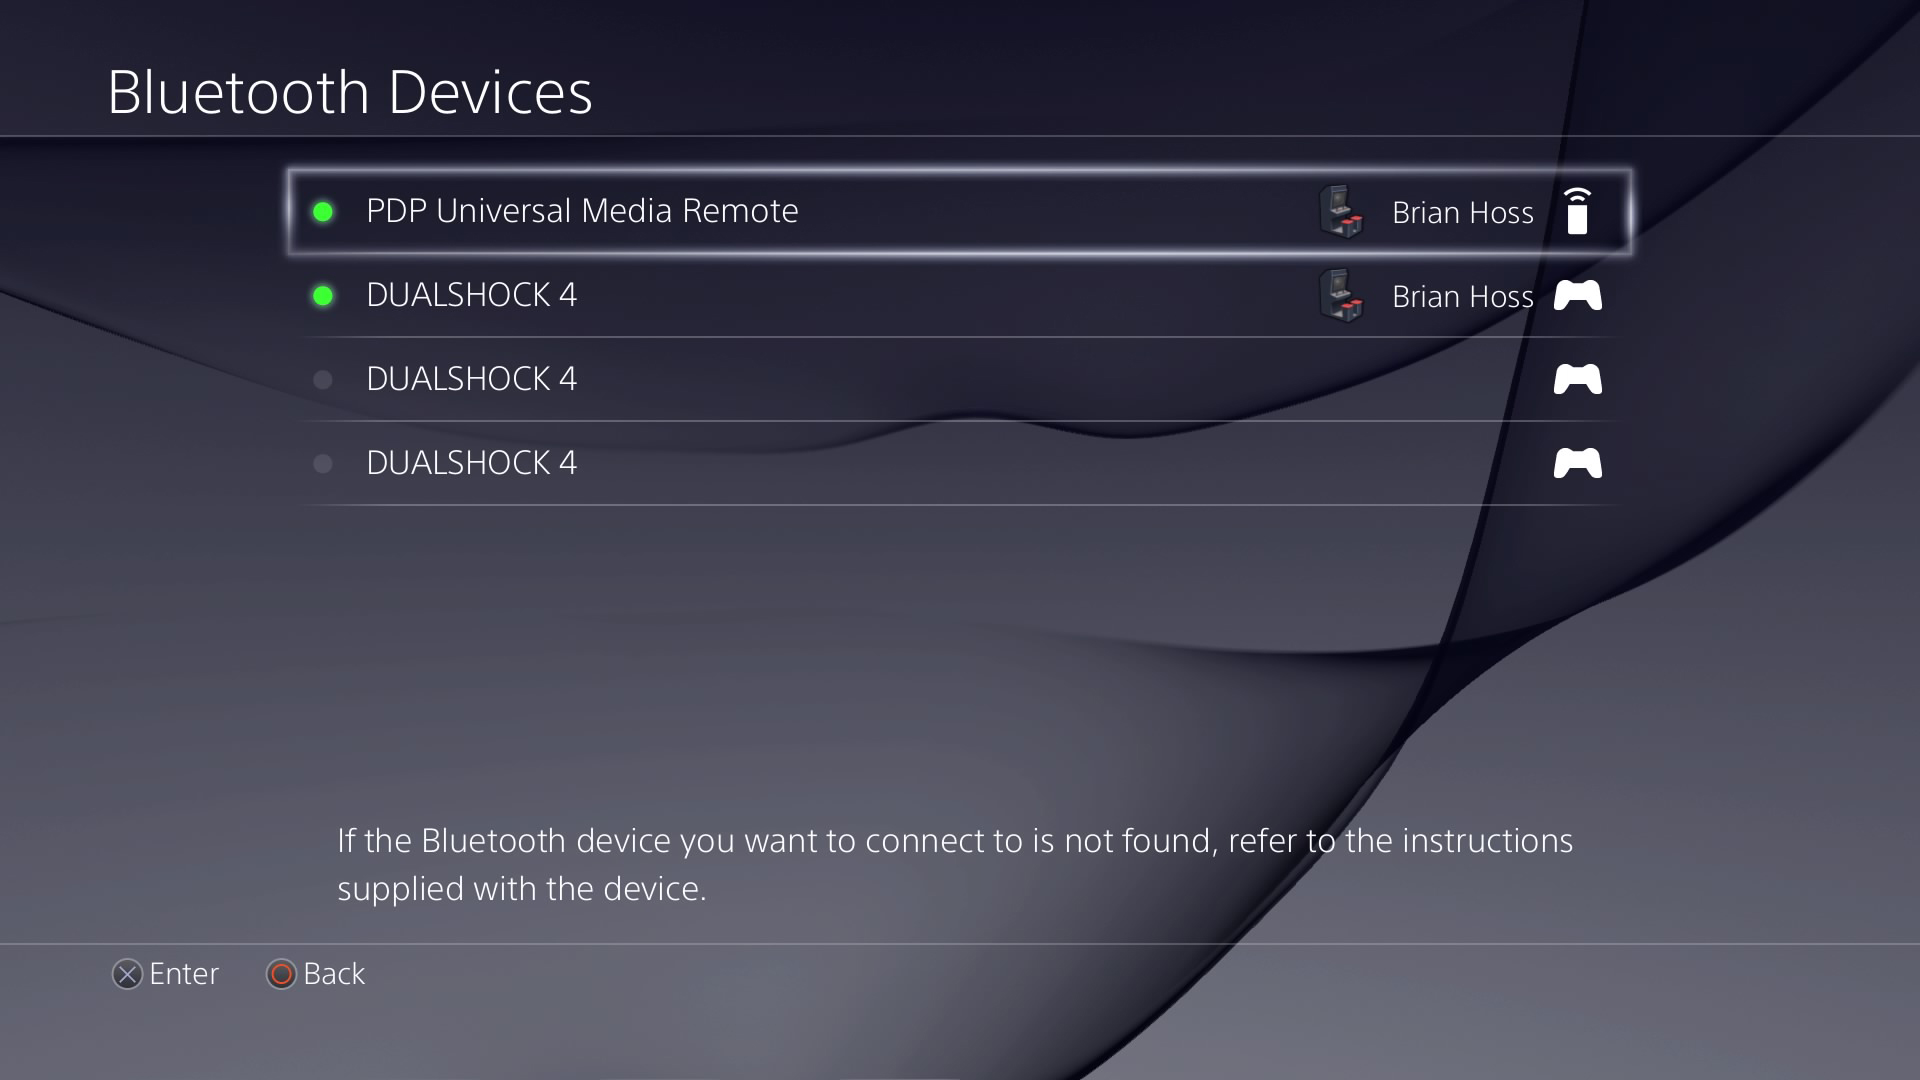 PS4 PDP Universal Media Remote Paired